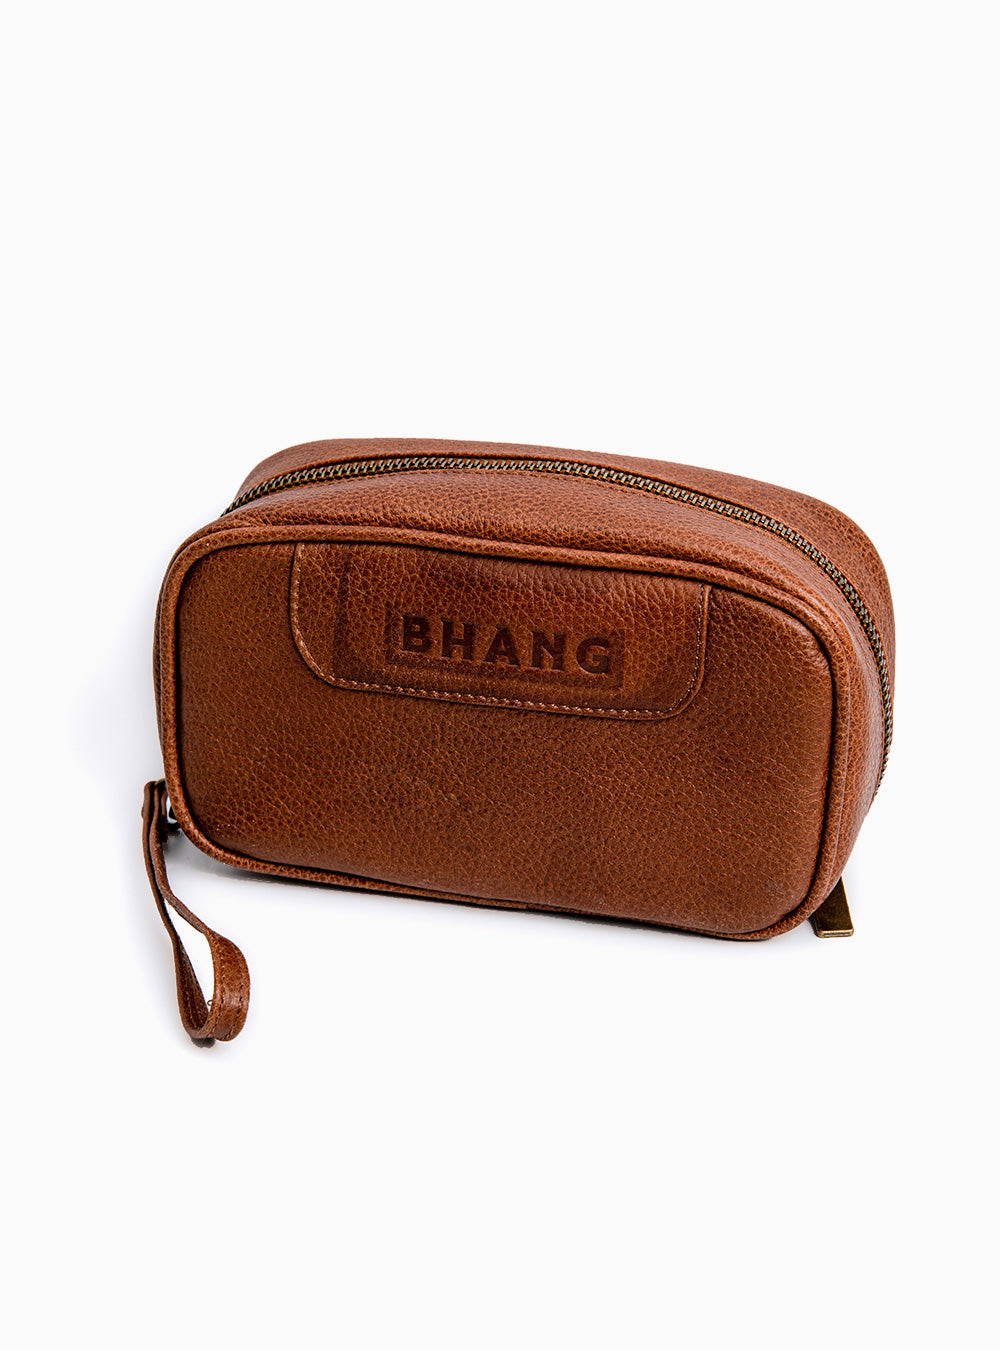 BHANG POUCH